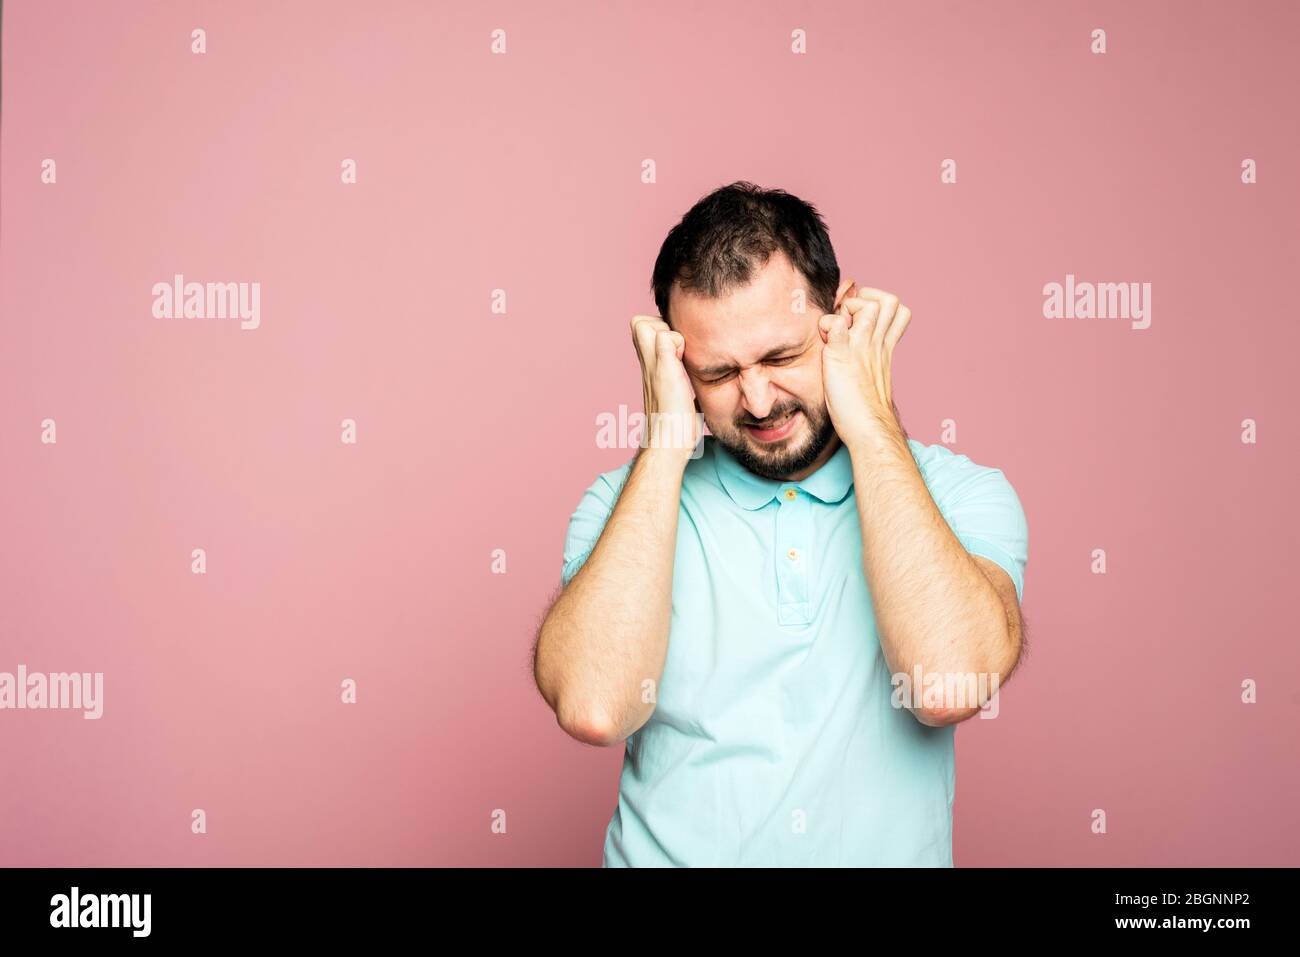 A portrait of a bearded man on the pink background. A man is sad with closed eyes. Sorry. Stock Photo